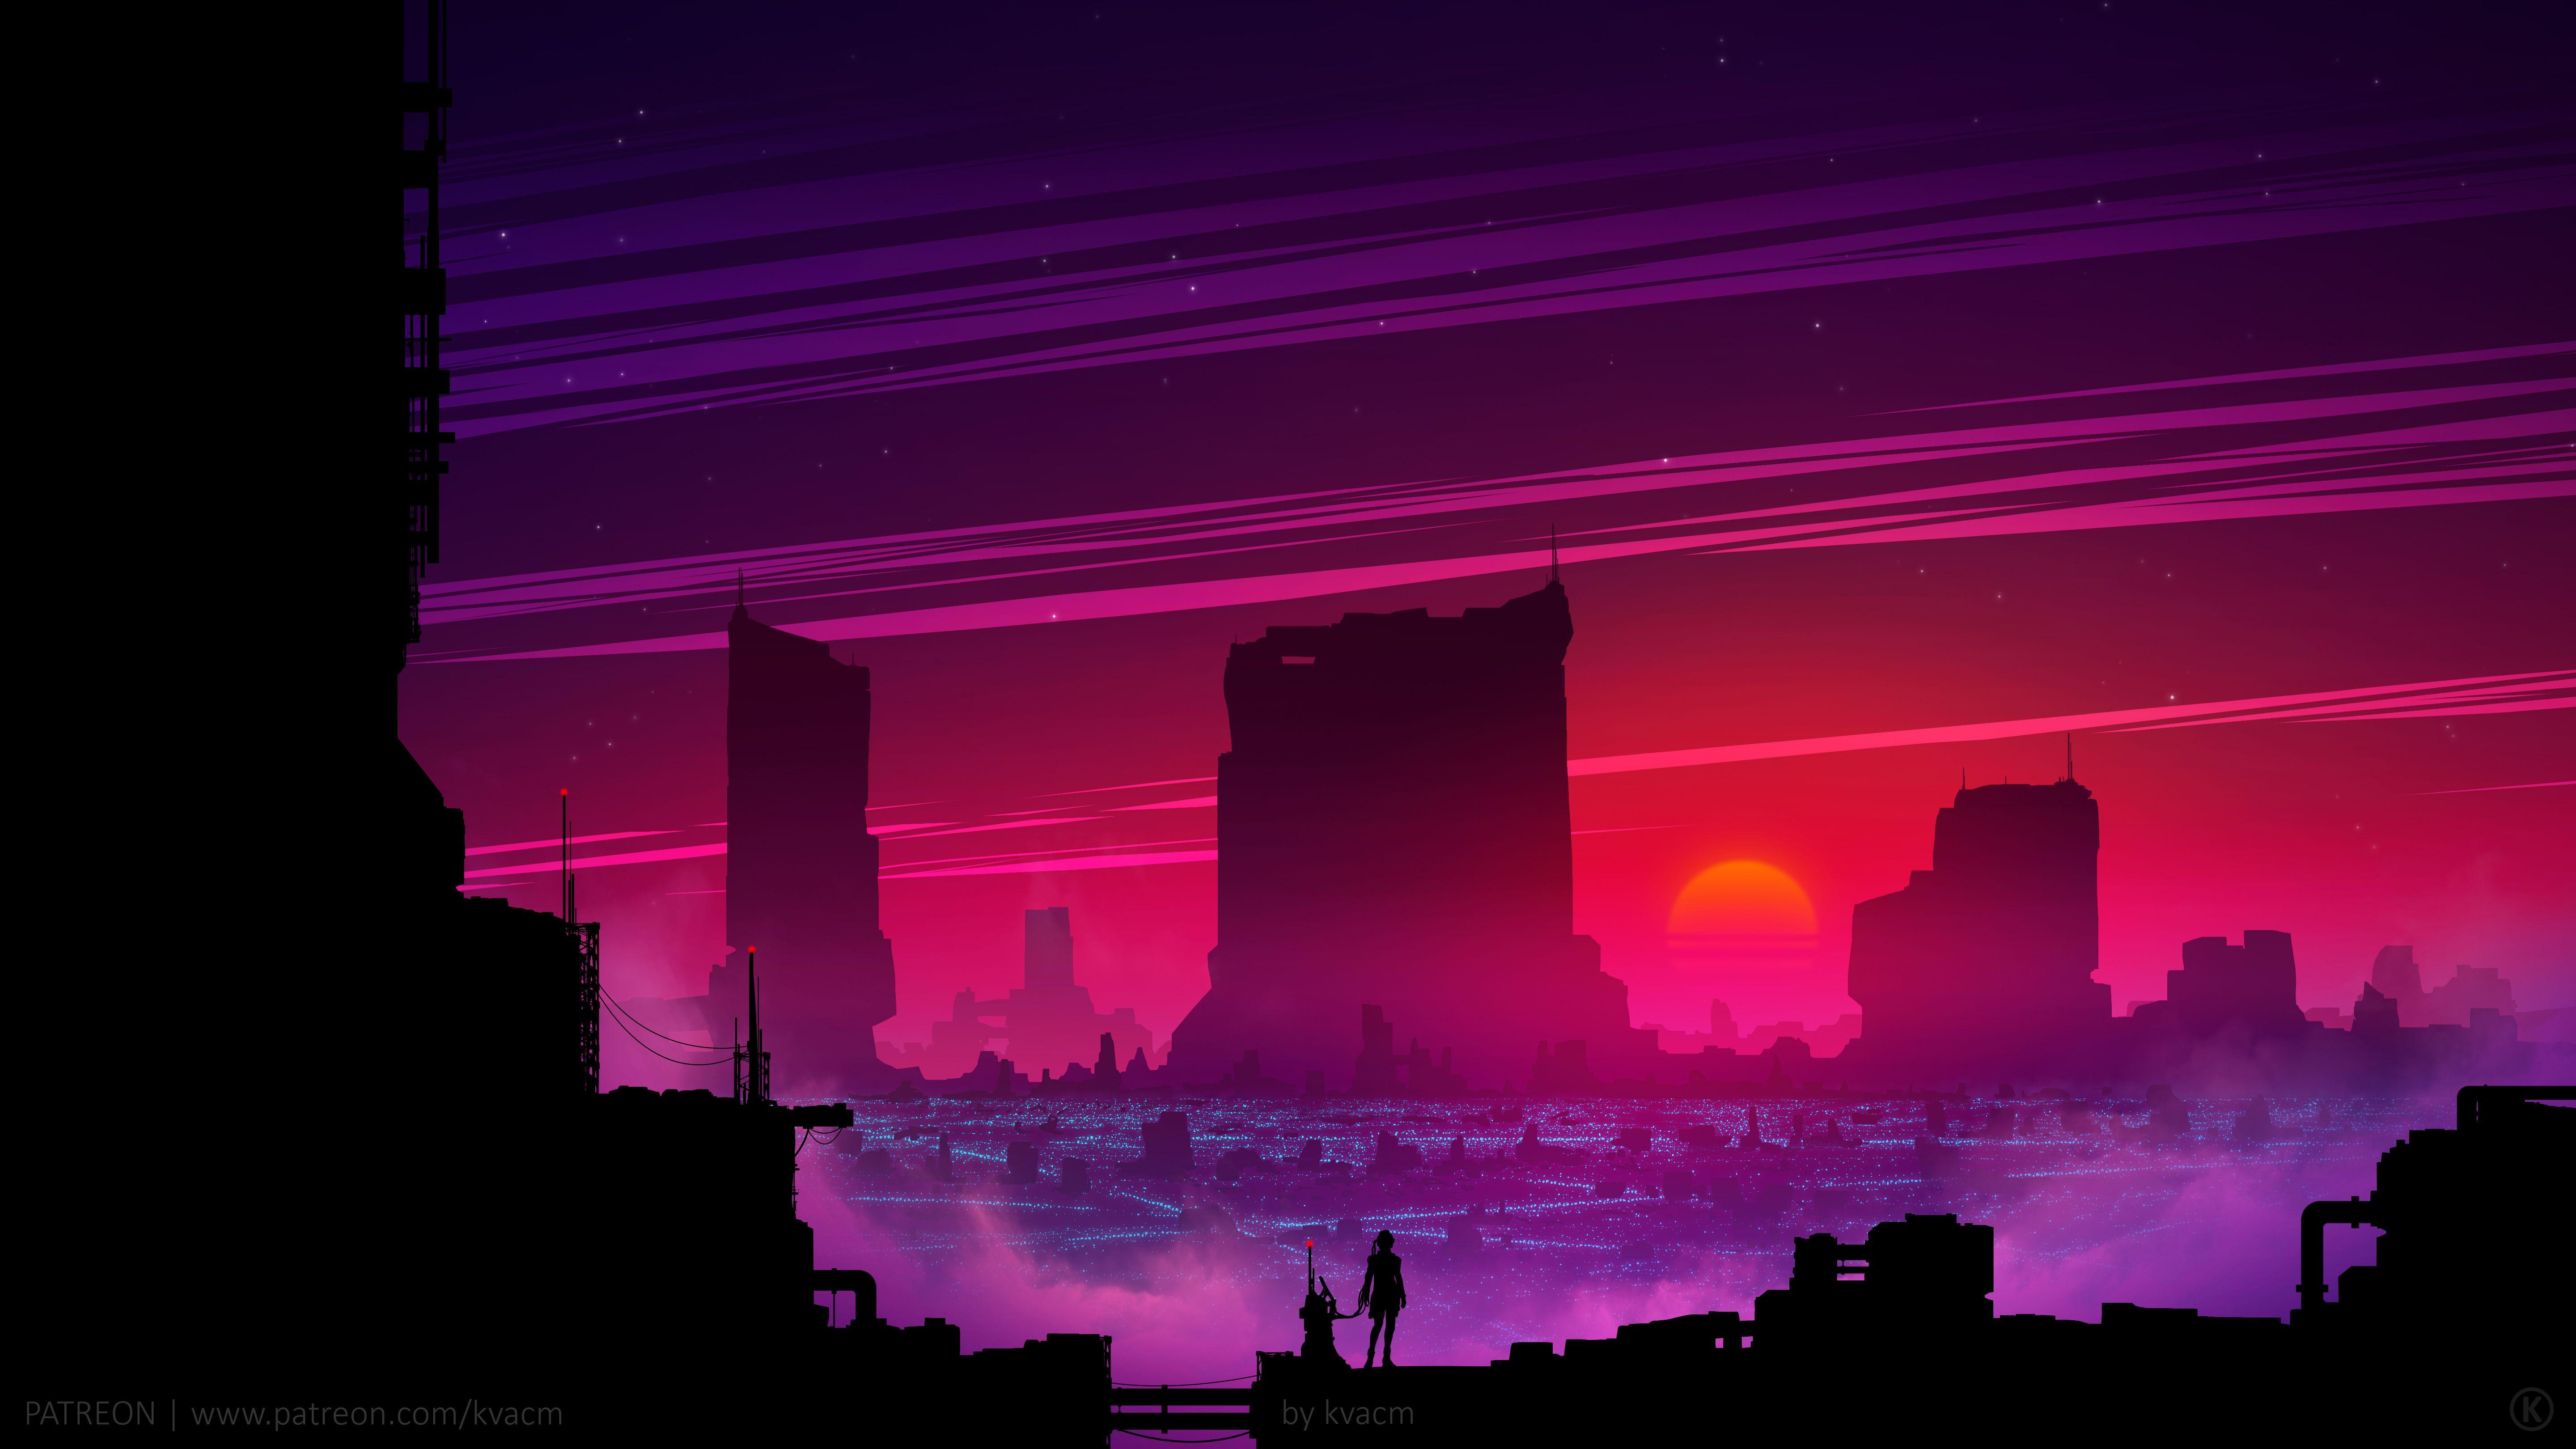 Synthwave Hd Alone Artistic Wallpapers